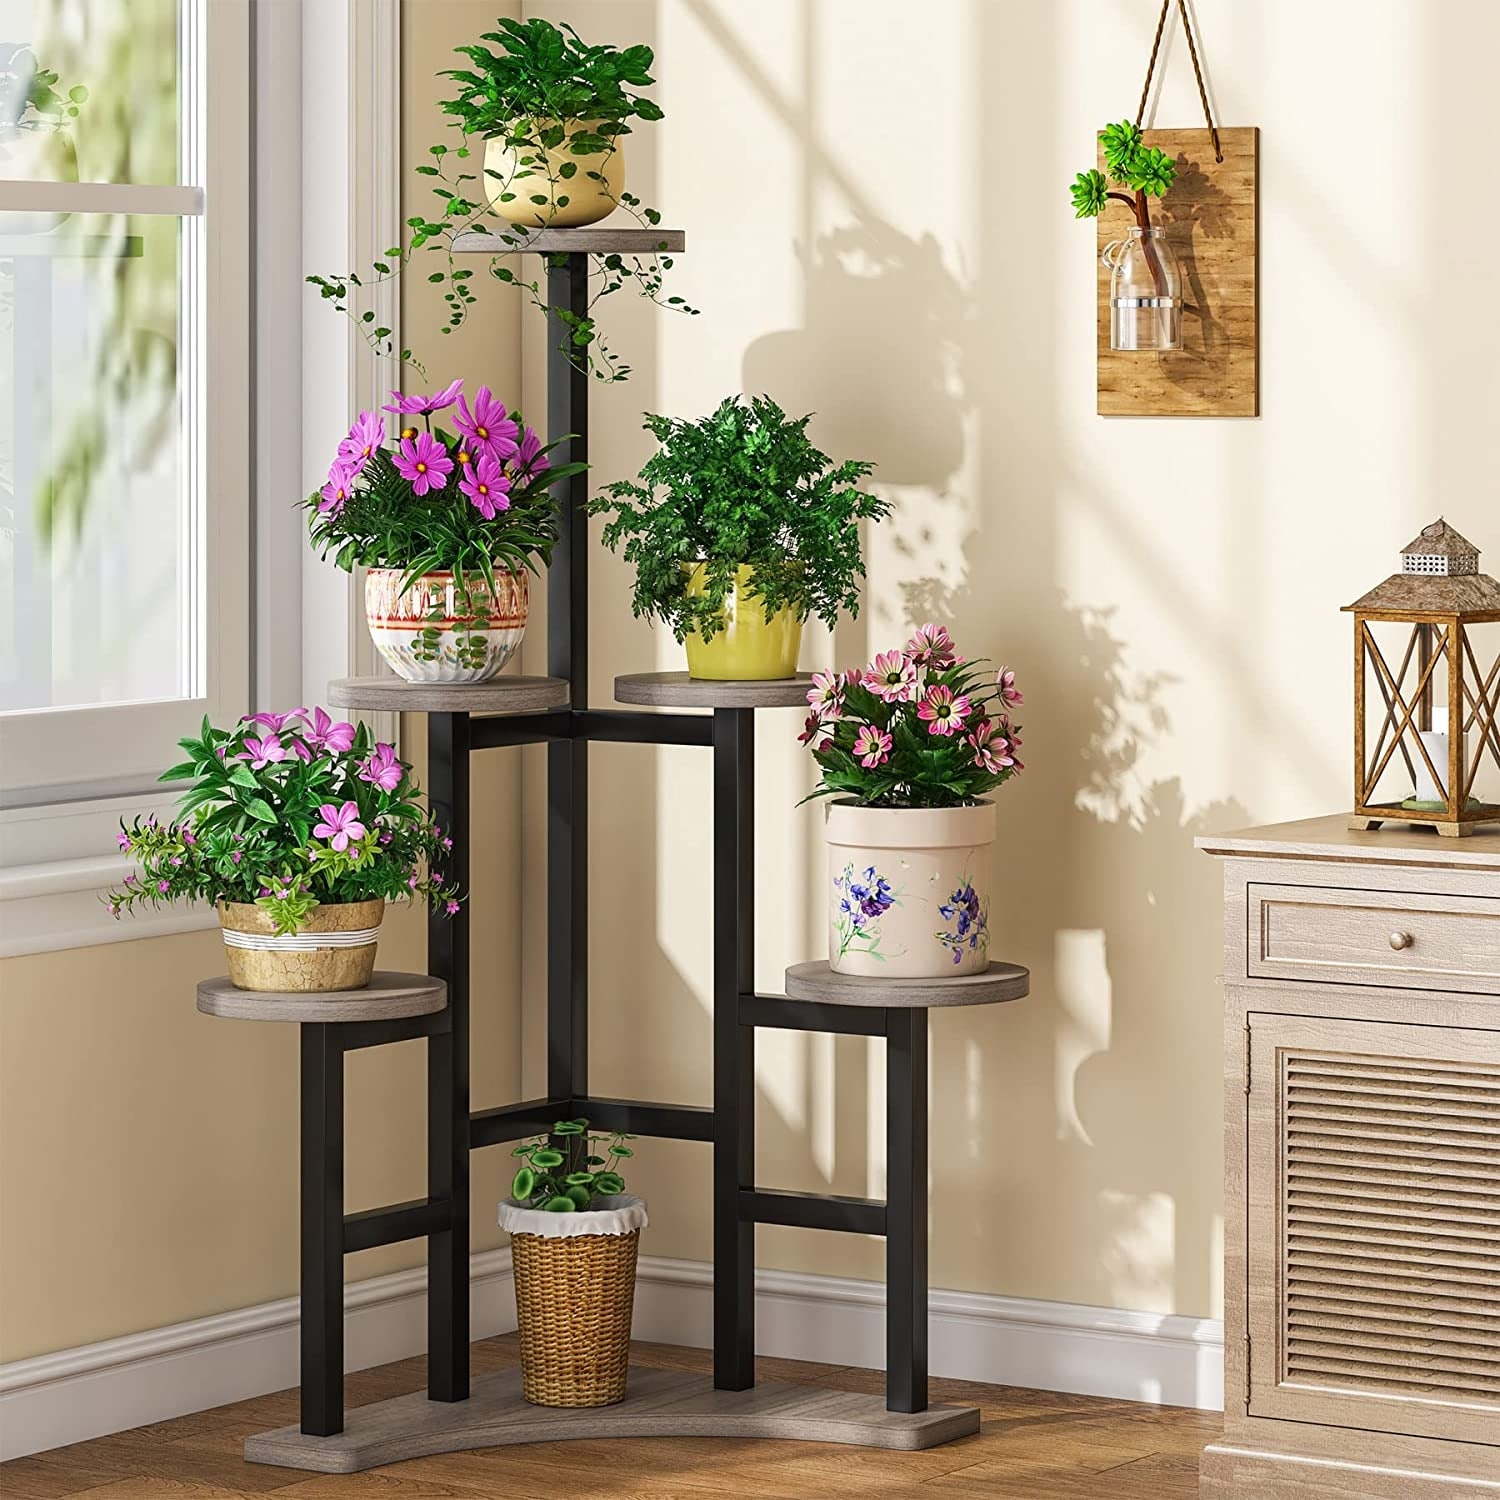 https://ak1.ostkcdn.com/images/products/is/images/direct/58357ce8d89d8da4b522bdc674e79b57b383c44a/Corner-Plant-Stand-Indoor-6-Tiered-Plant-Shelf-Flower-Stand.jpg